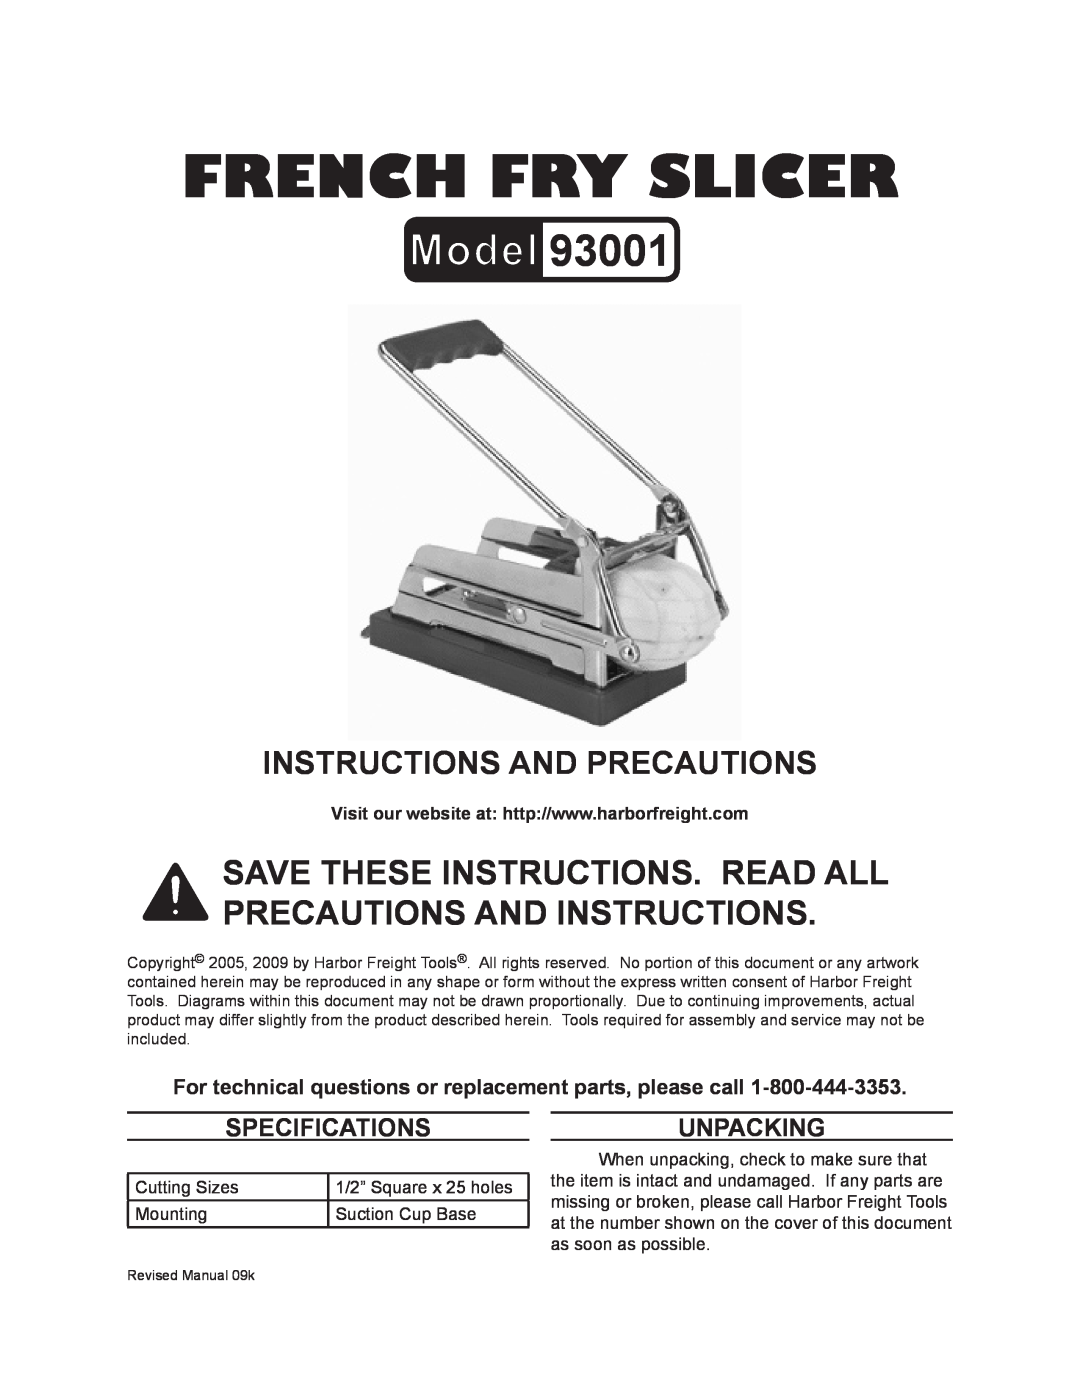 Harbor Freight Tools 93001 specifications Specifications, Unpacking, FRENCH FrY SLICER, Instructions and precautions 